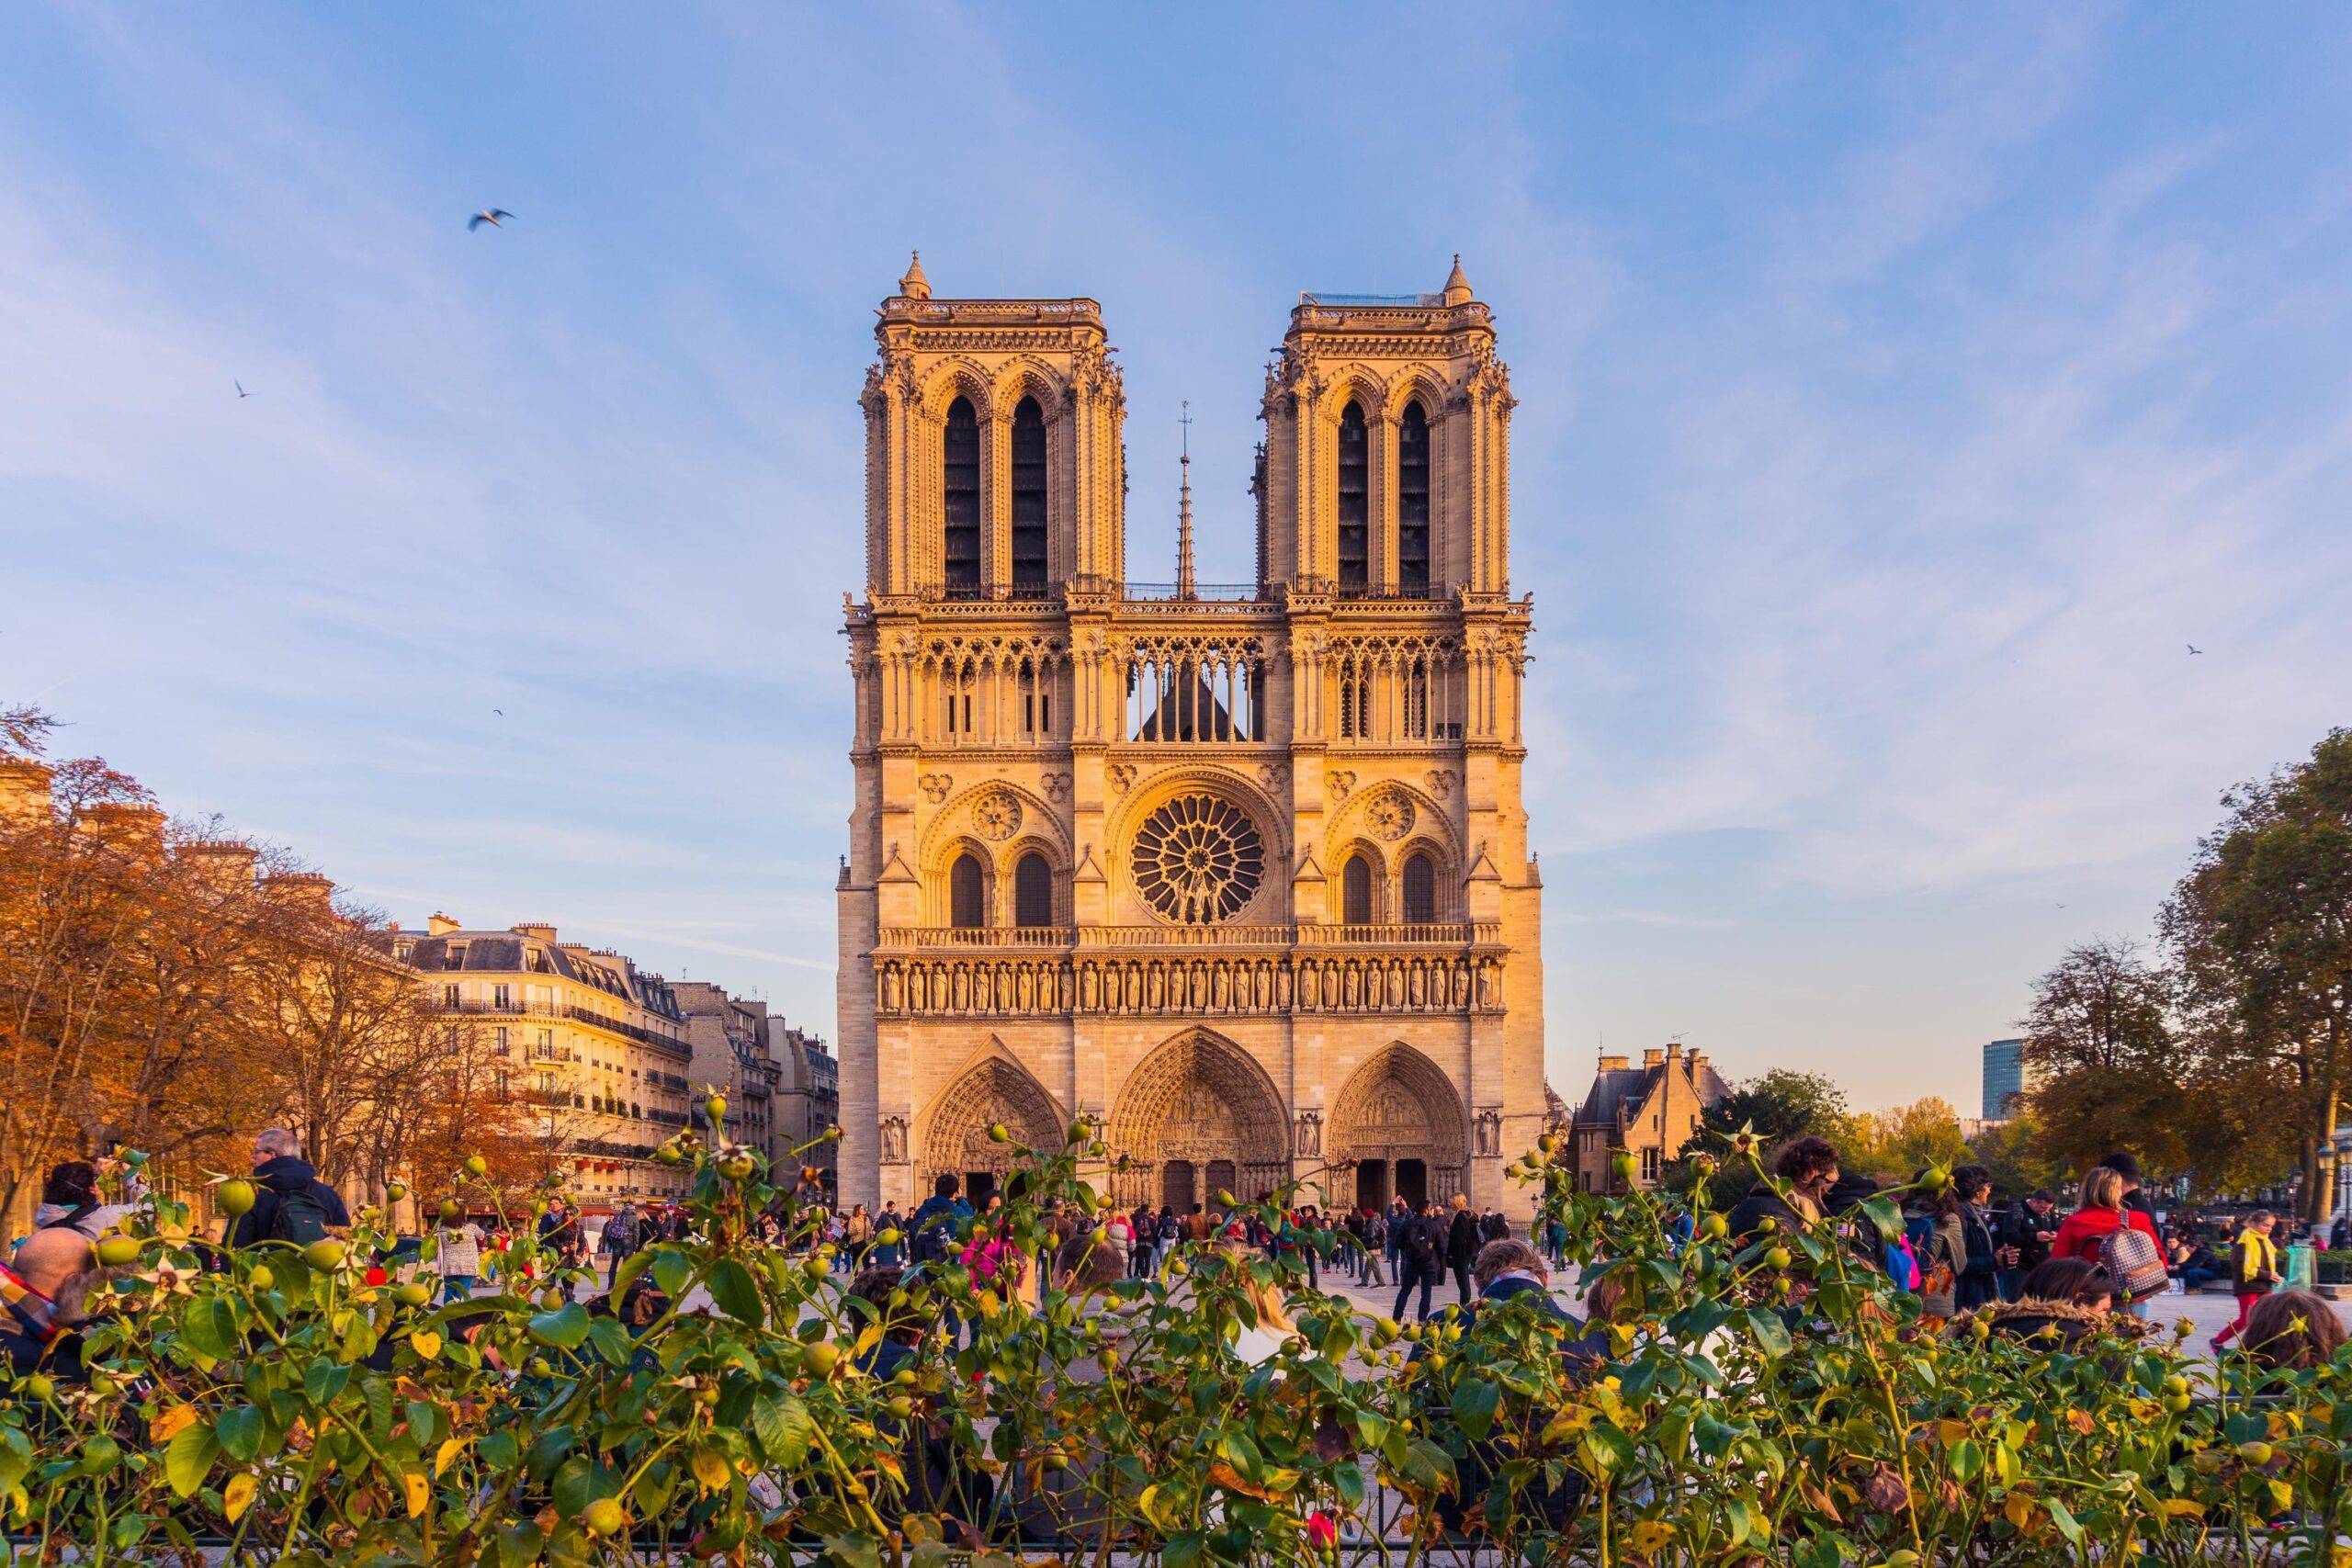 Things You Shouldn’t Miss while Visiting the Notre Dame